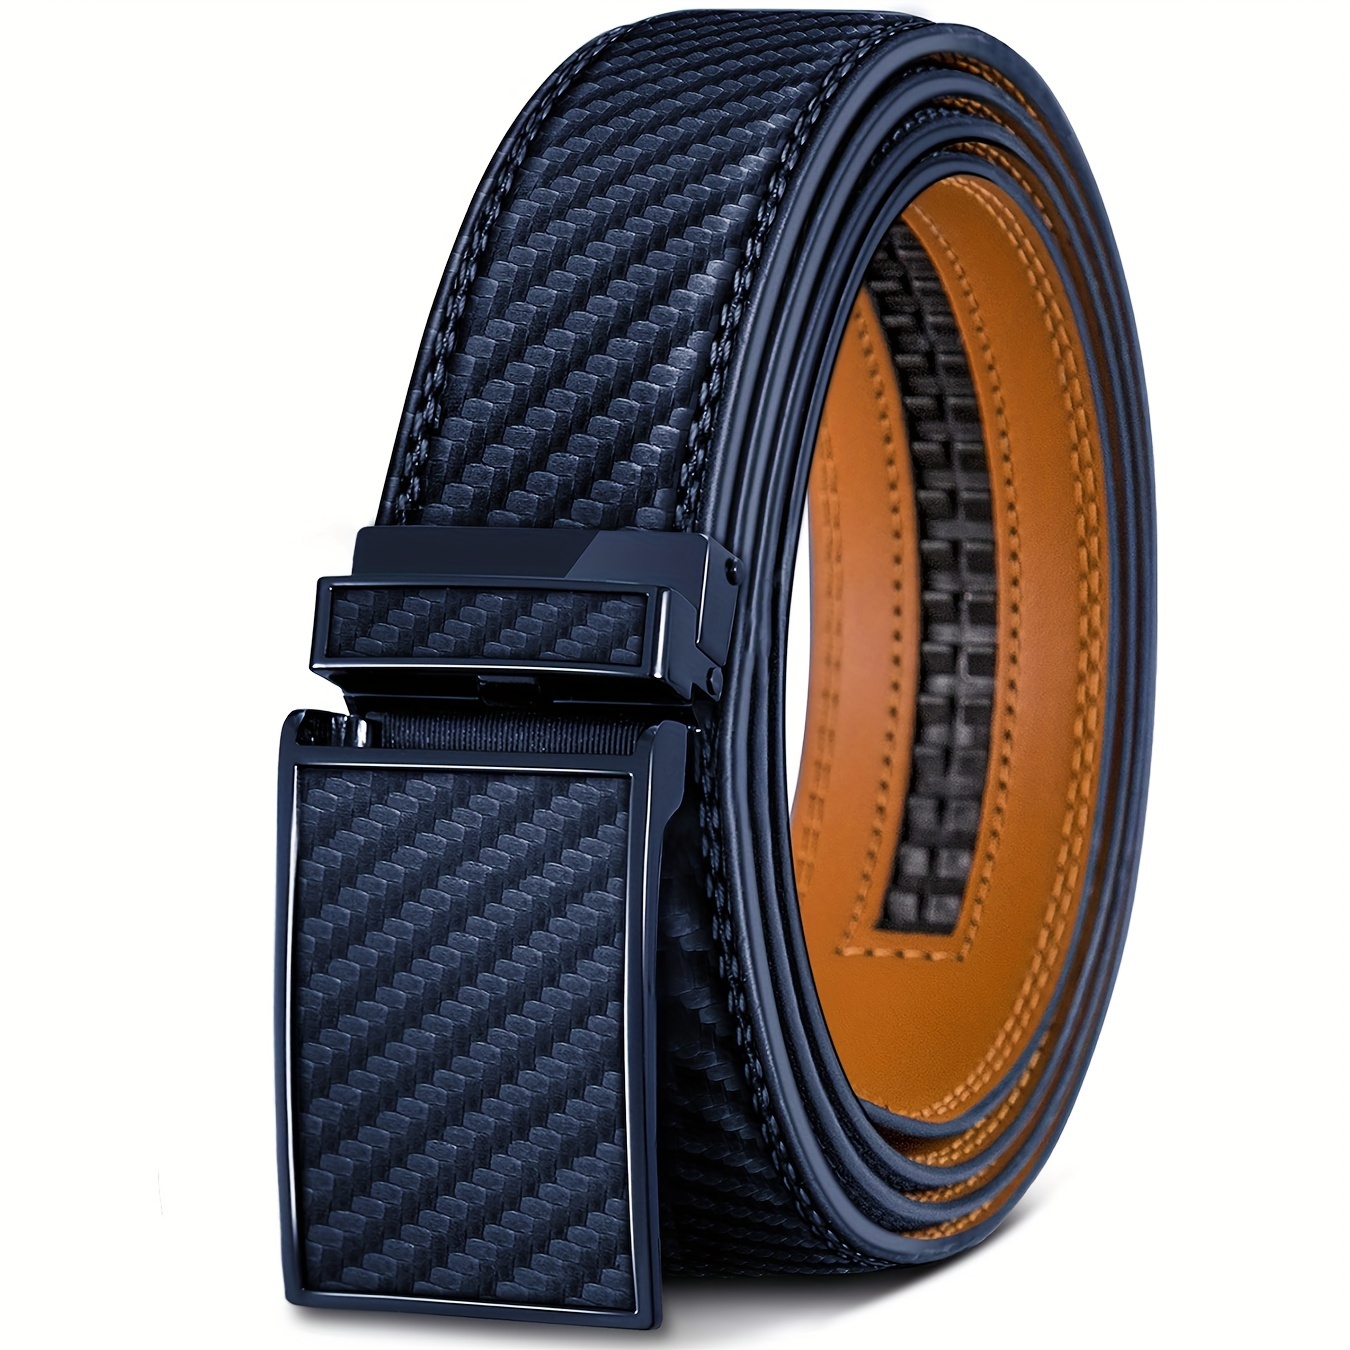 

Men's Genuine Leather Cowhide Sliding Belt With Adjustable Automatic Buckle